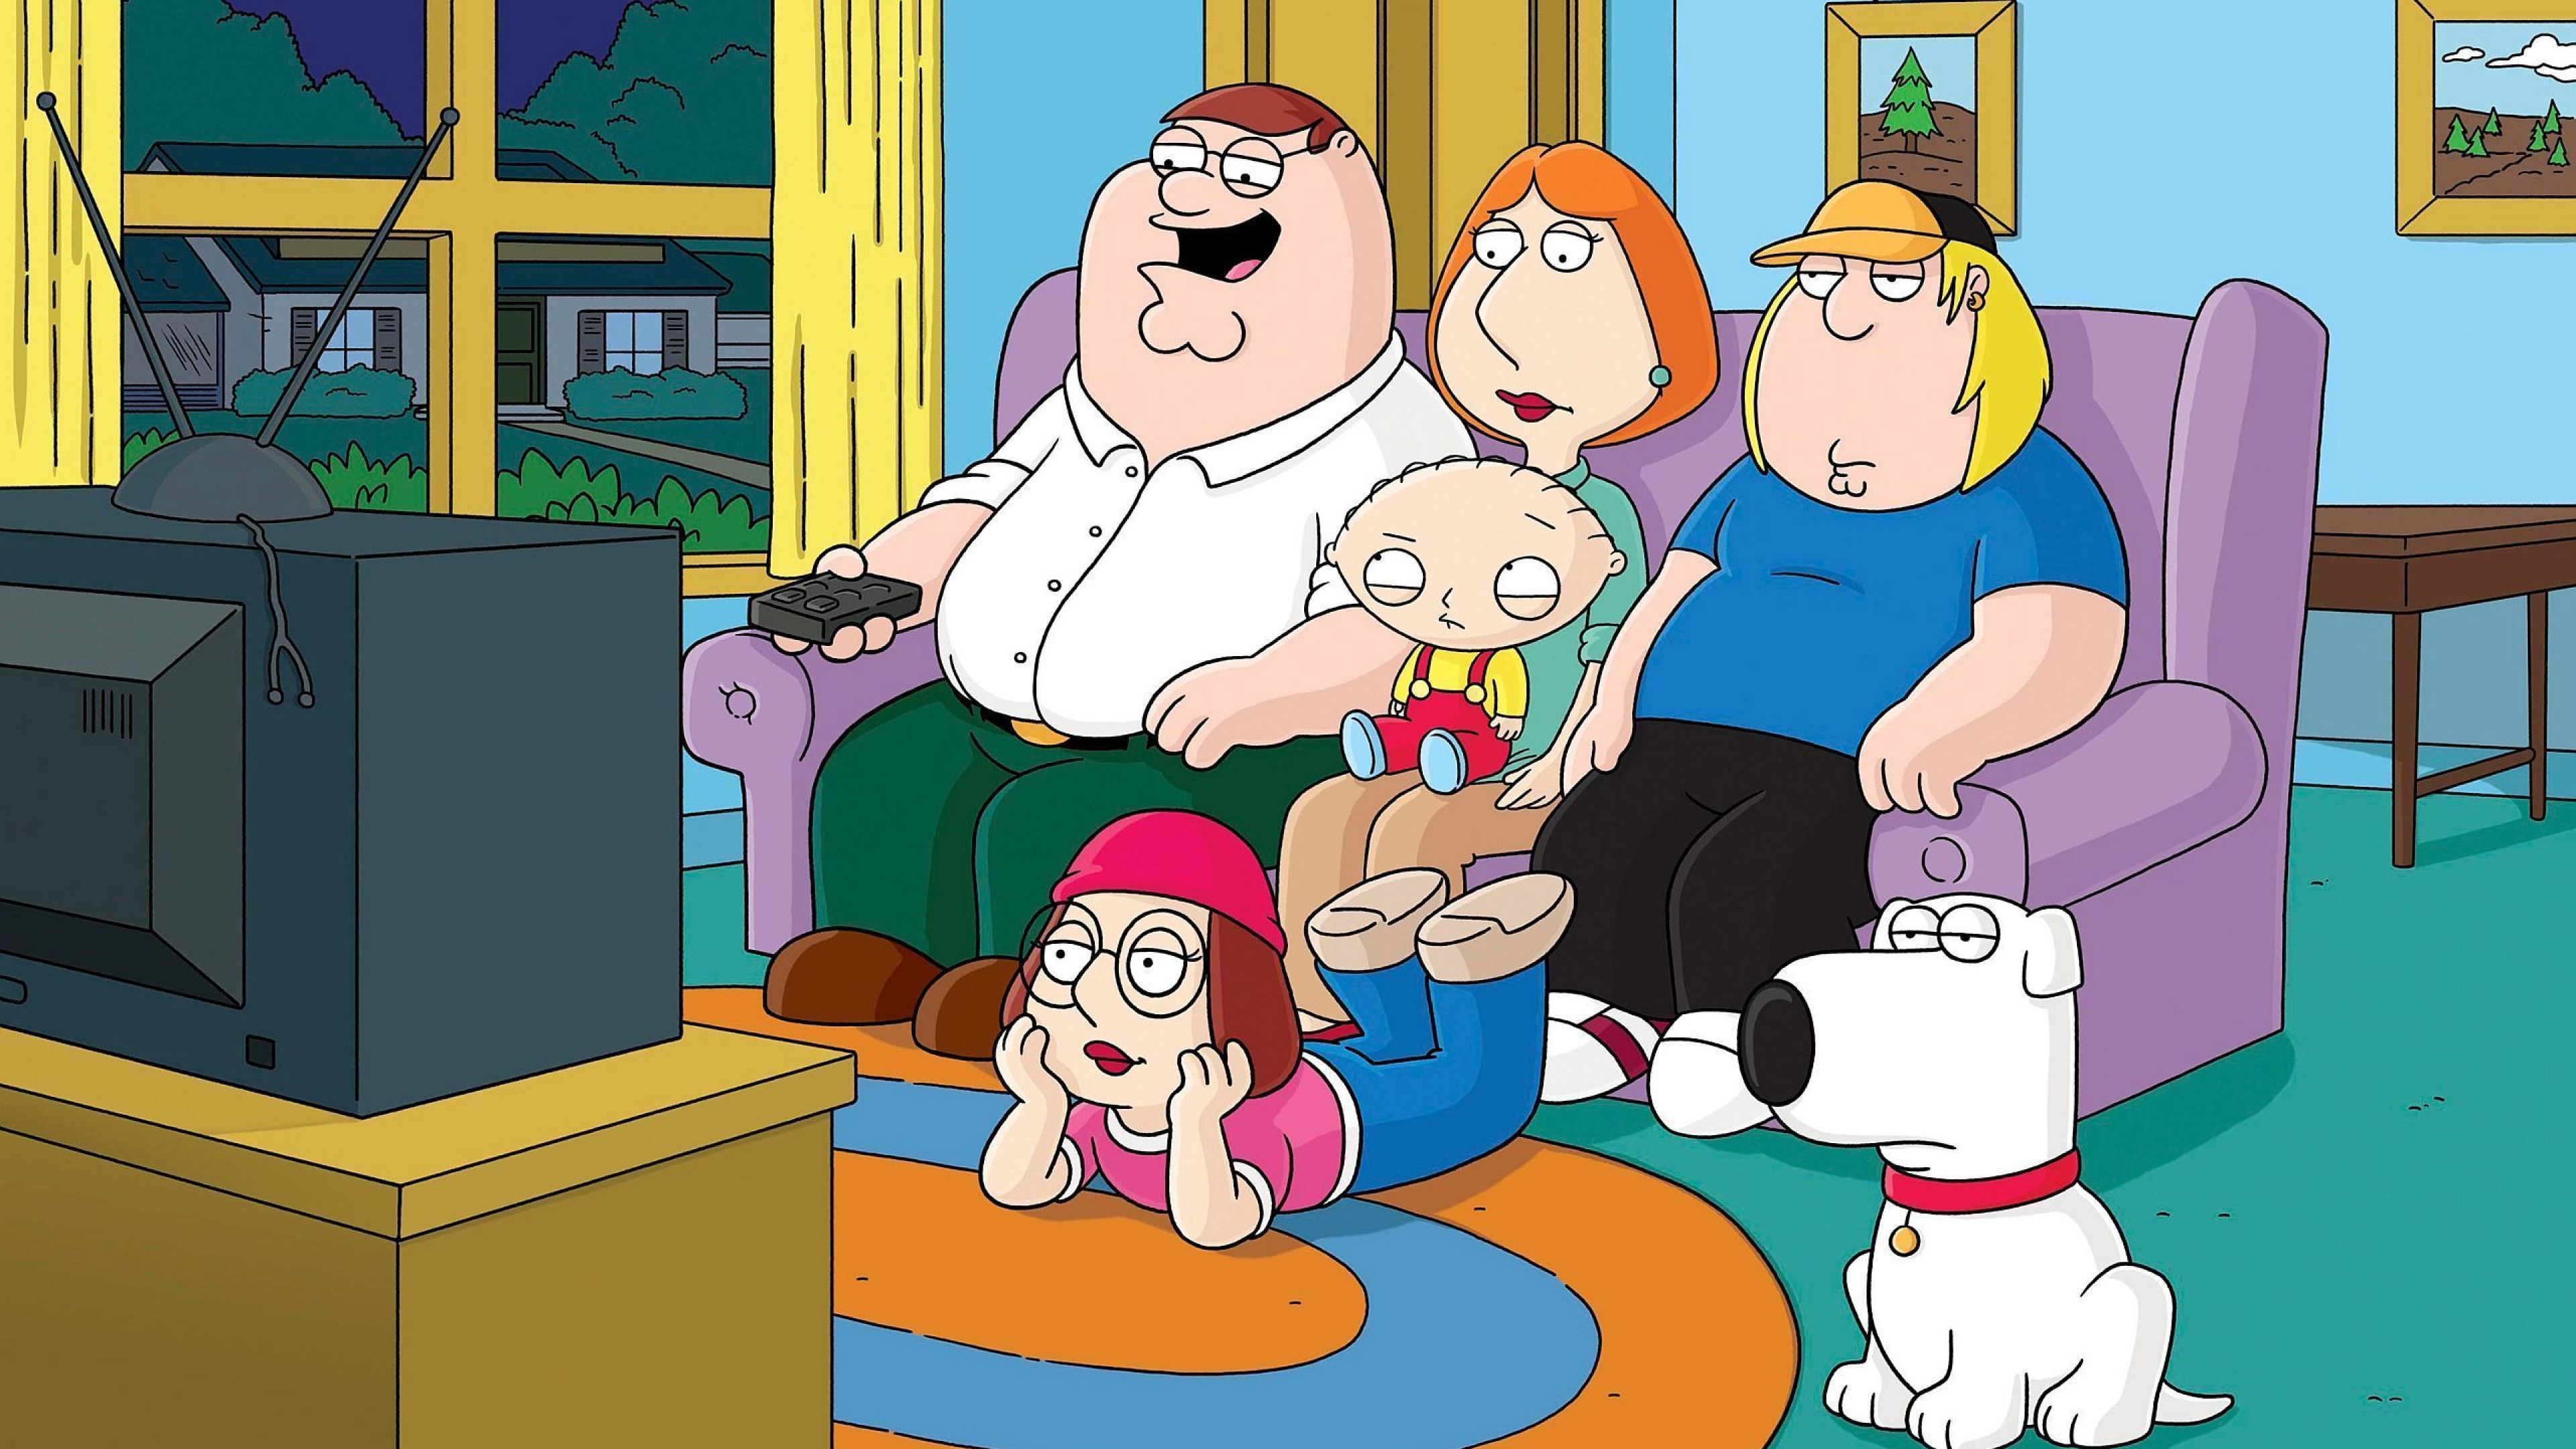 Fictional Character Peter Griffin in Family Guy Wallpaper  HD Wallpapers